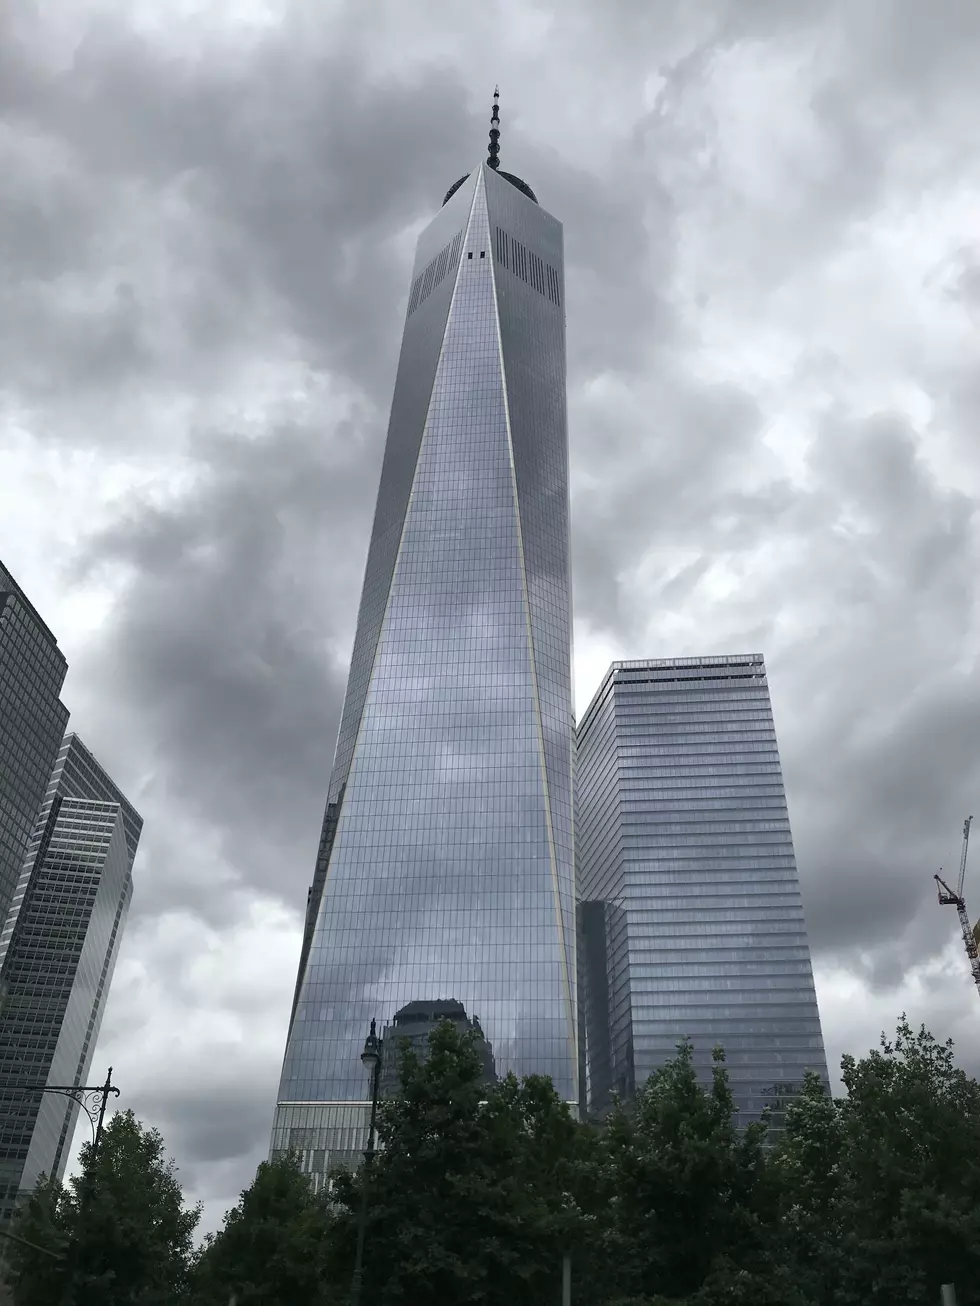 911 Memorial In New York Is Something Everyone Should See: CJ’s Daily Message July 4, 2019